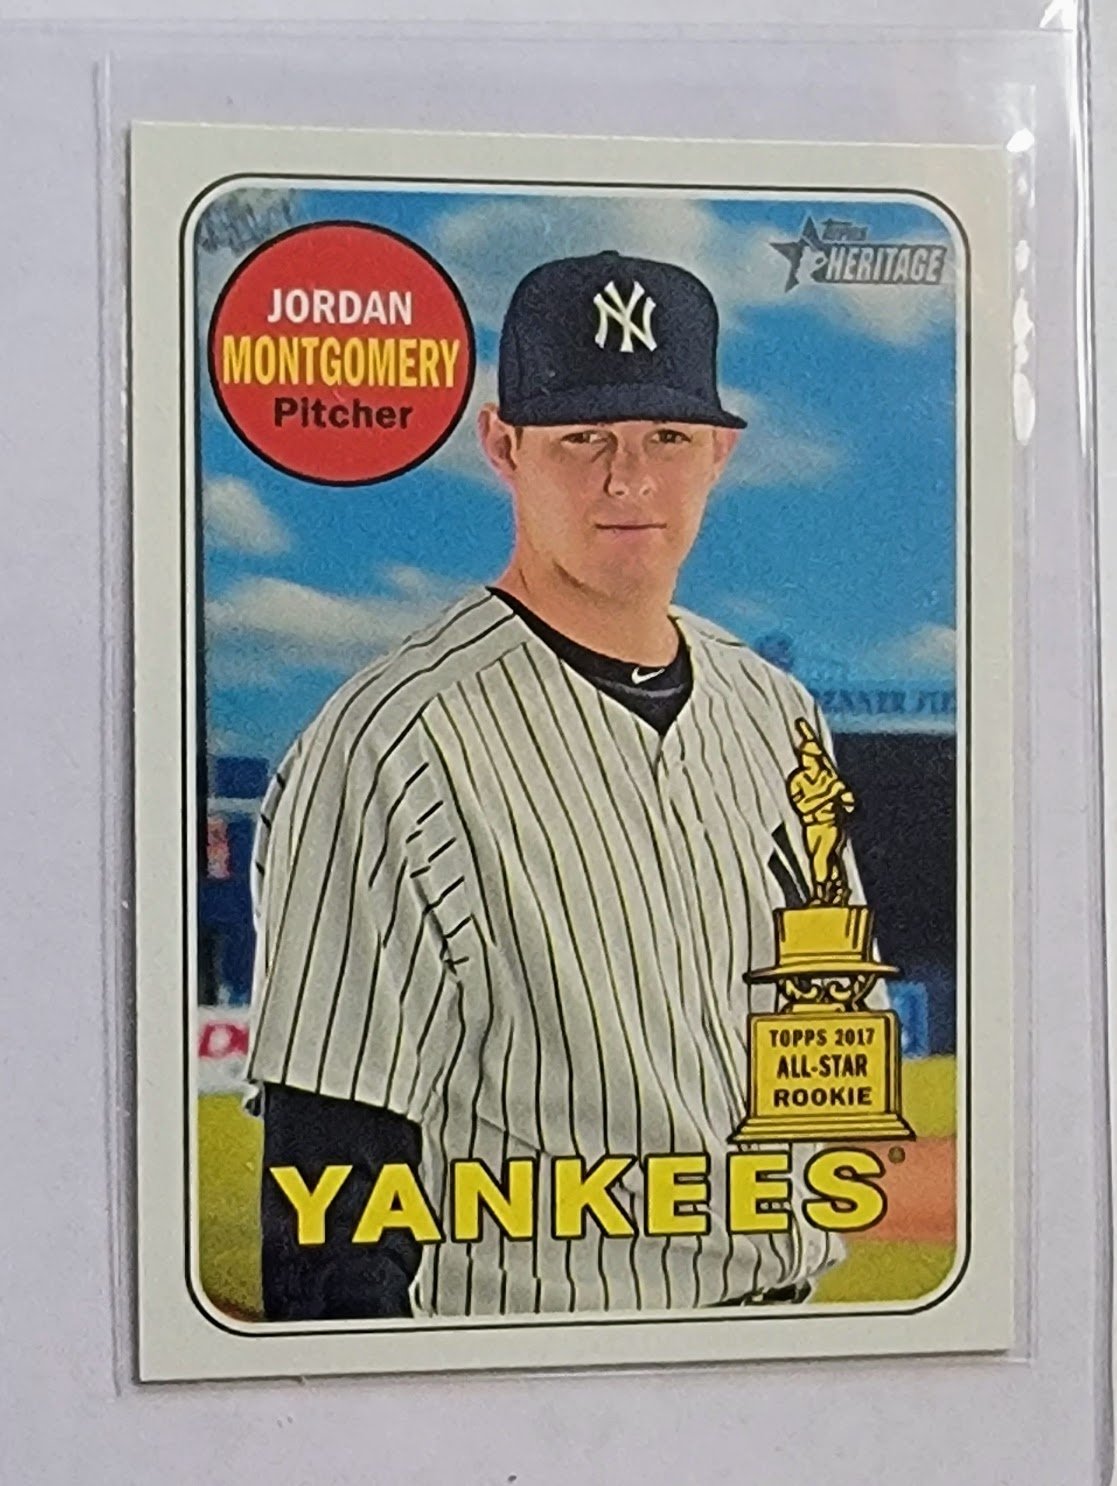 2018 Topps Heritage Jordan Montgomery 2017 All Star Rookie Insert Baseball Card TPTV simple Xclusive Collectibles   